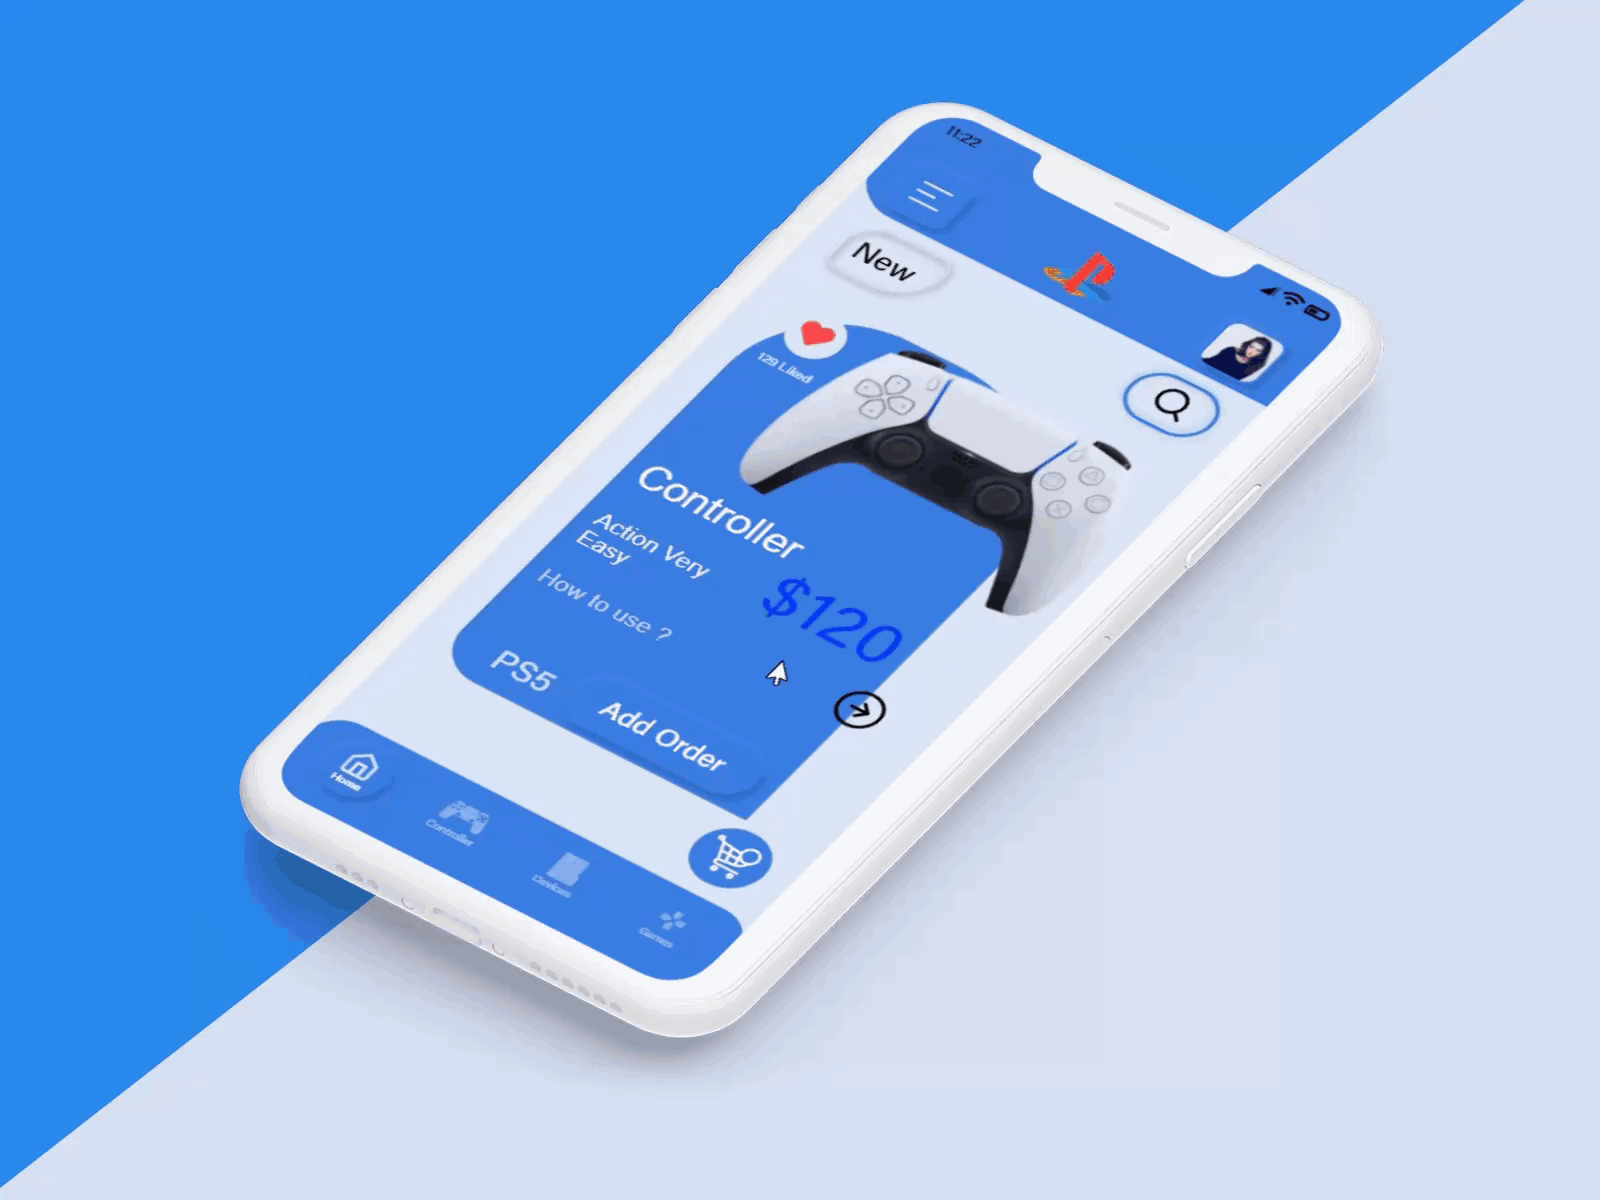 PlayStation App Design (Animation) animation app controller design interaction design playstation playstation5 prototype animation ui design uidesign uiux uiux designer uiuxdesign uiuxdesigner user experience user interface design userinterface ux uxdesign uxui